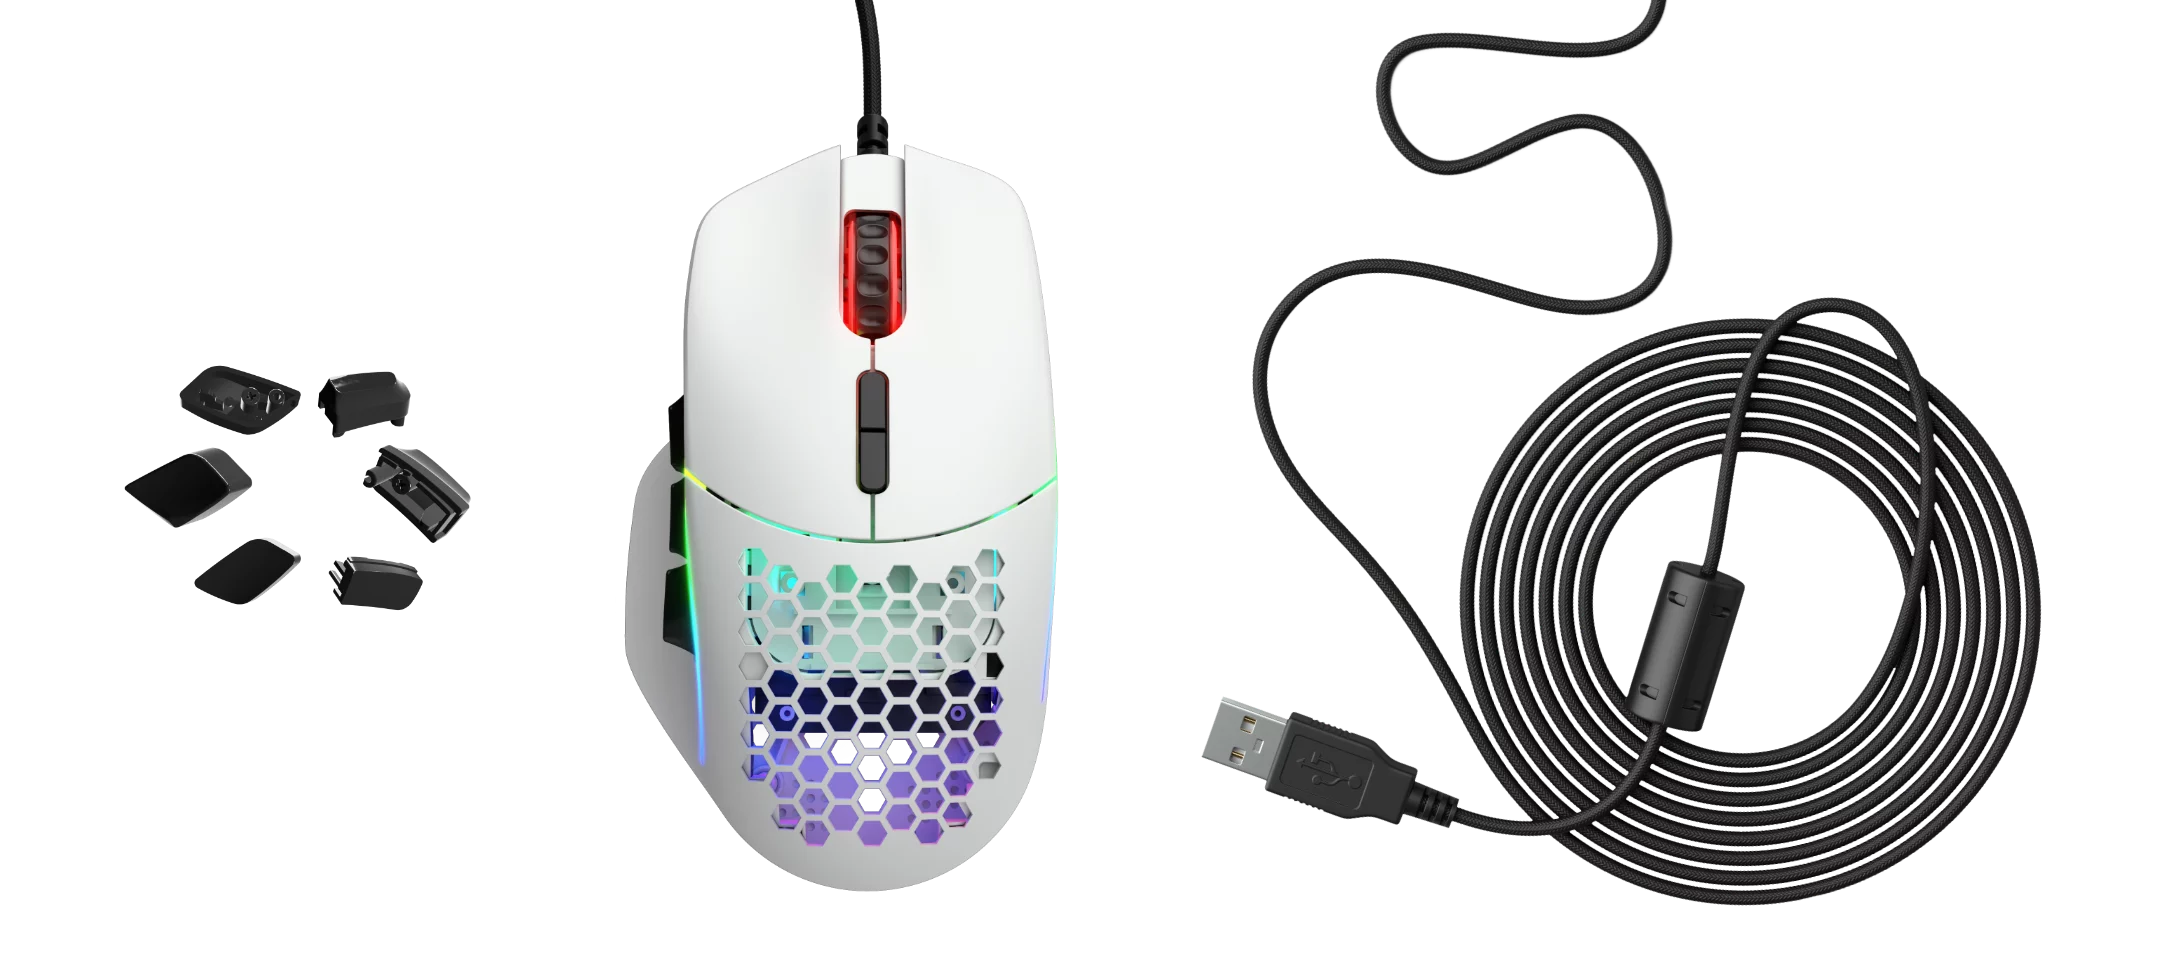 A large marketing image providing additional information about the product Glorious Model I Wired Gaming MMO Mouse - Matte White - Additional alt info not provided